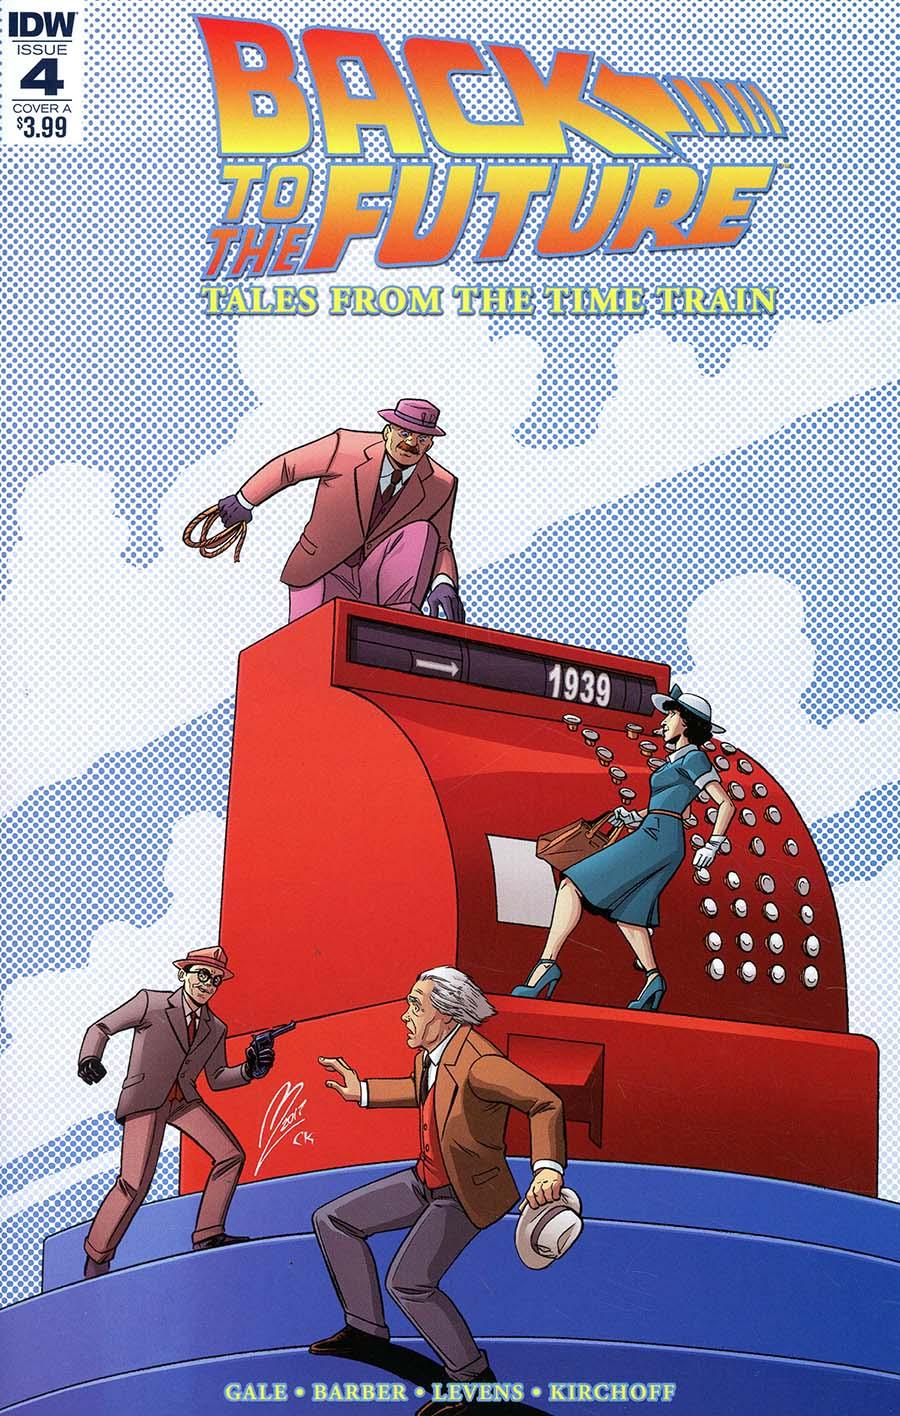 Back To The Future Tales From The Time Train Vol. 1 #4